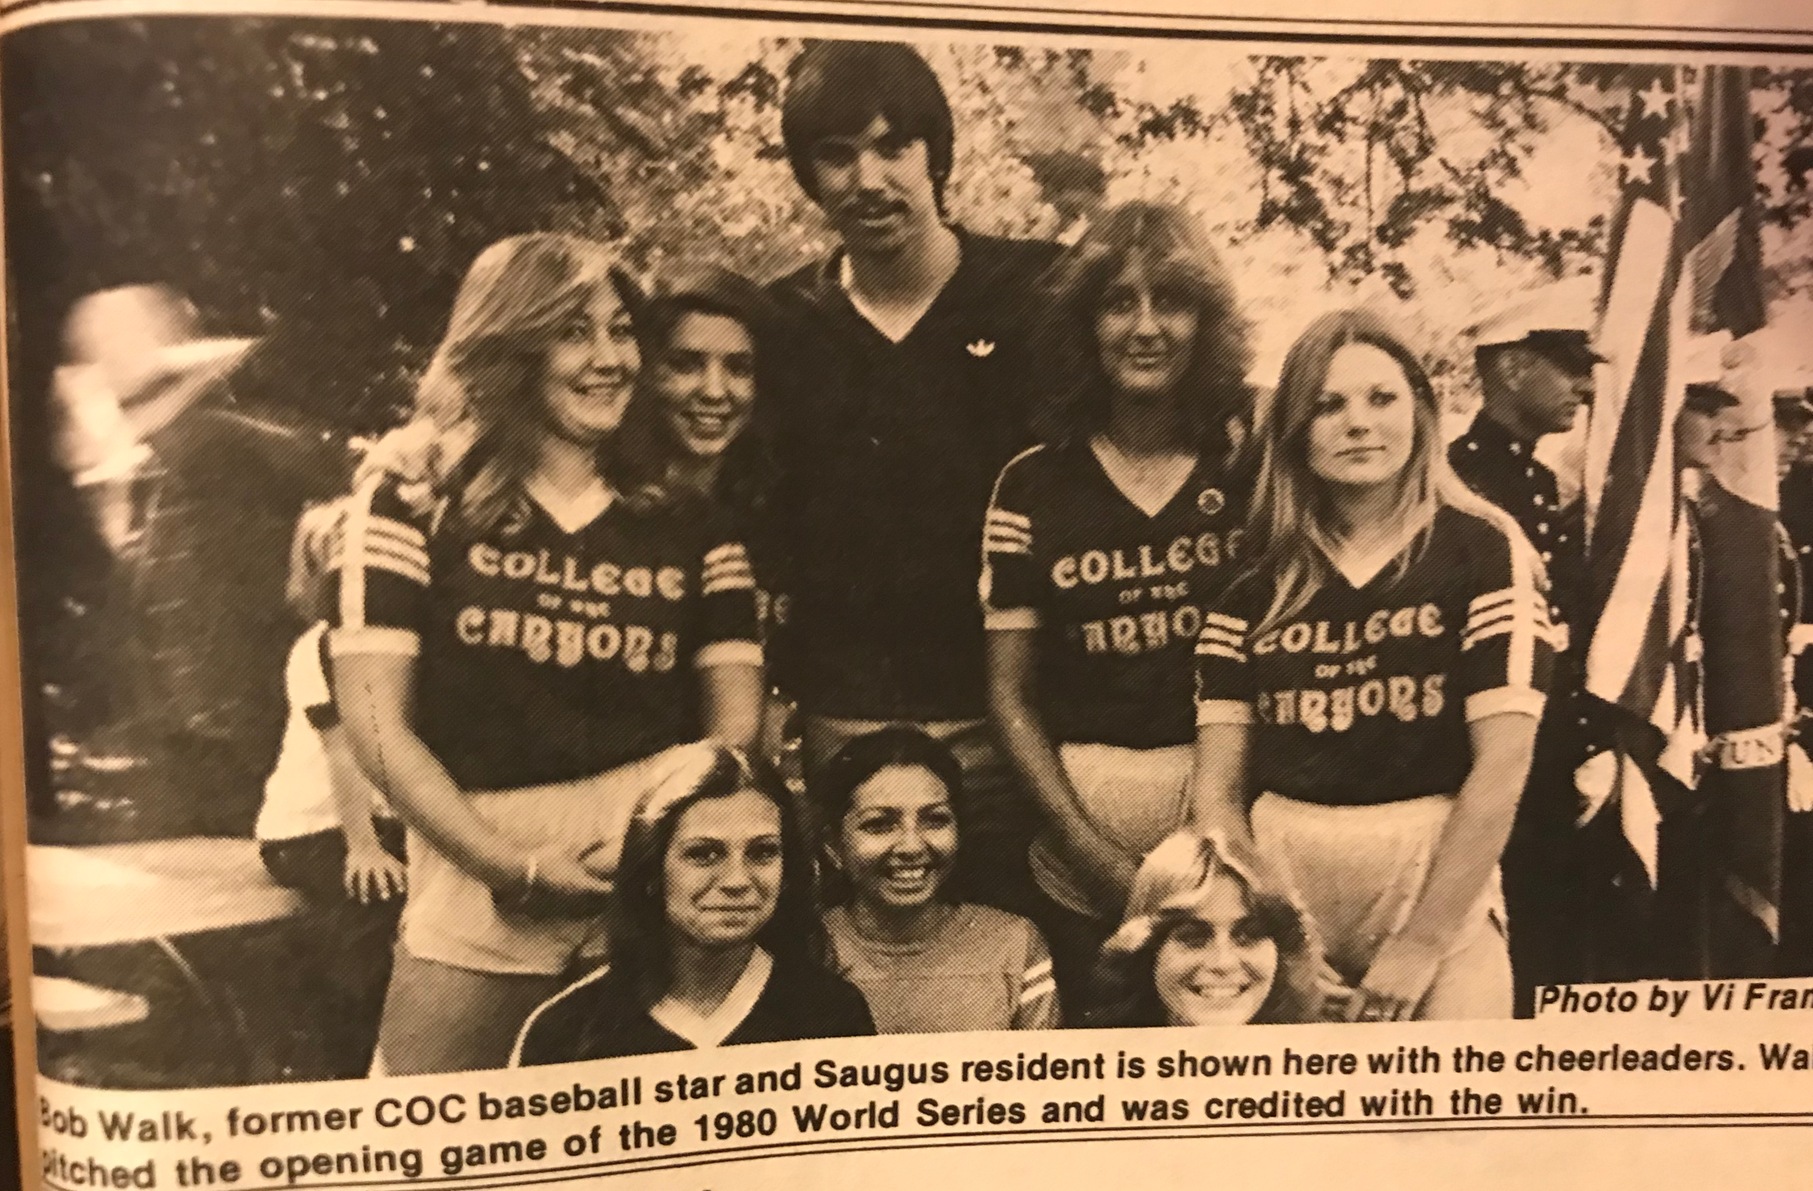 Former COC baseball pitcher Bob Walk appears with a contingent of COC cheerleaders during a 1980 victory parade celebrating Walk's role in the Philadelphia Phillies 1980 World Series championship.